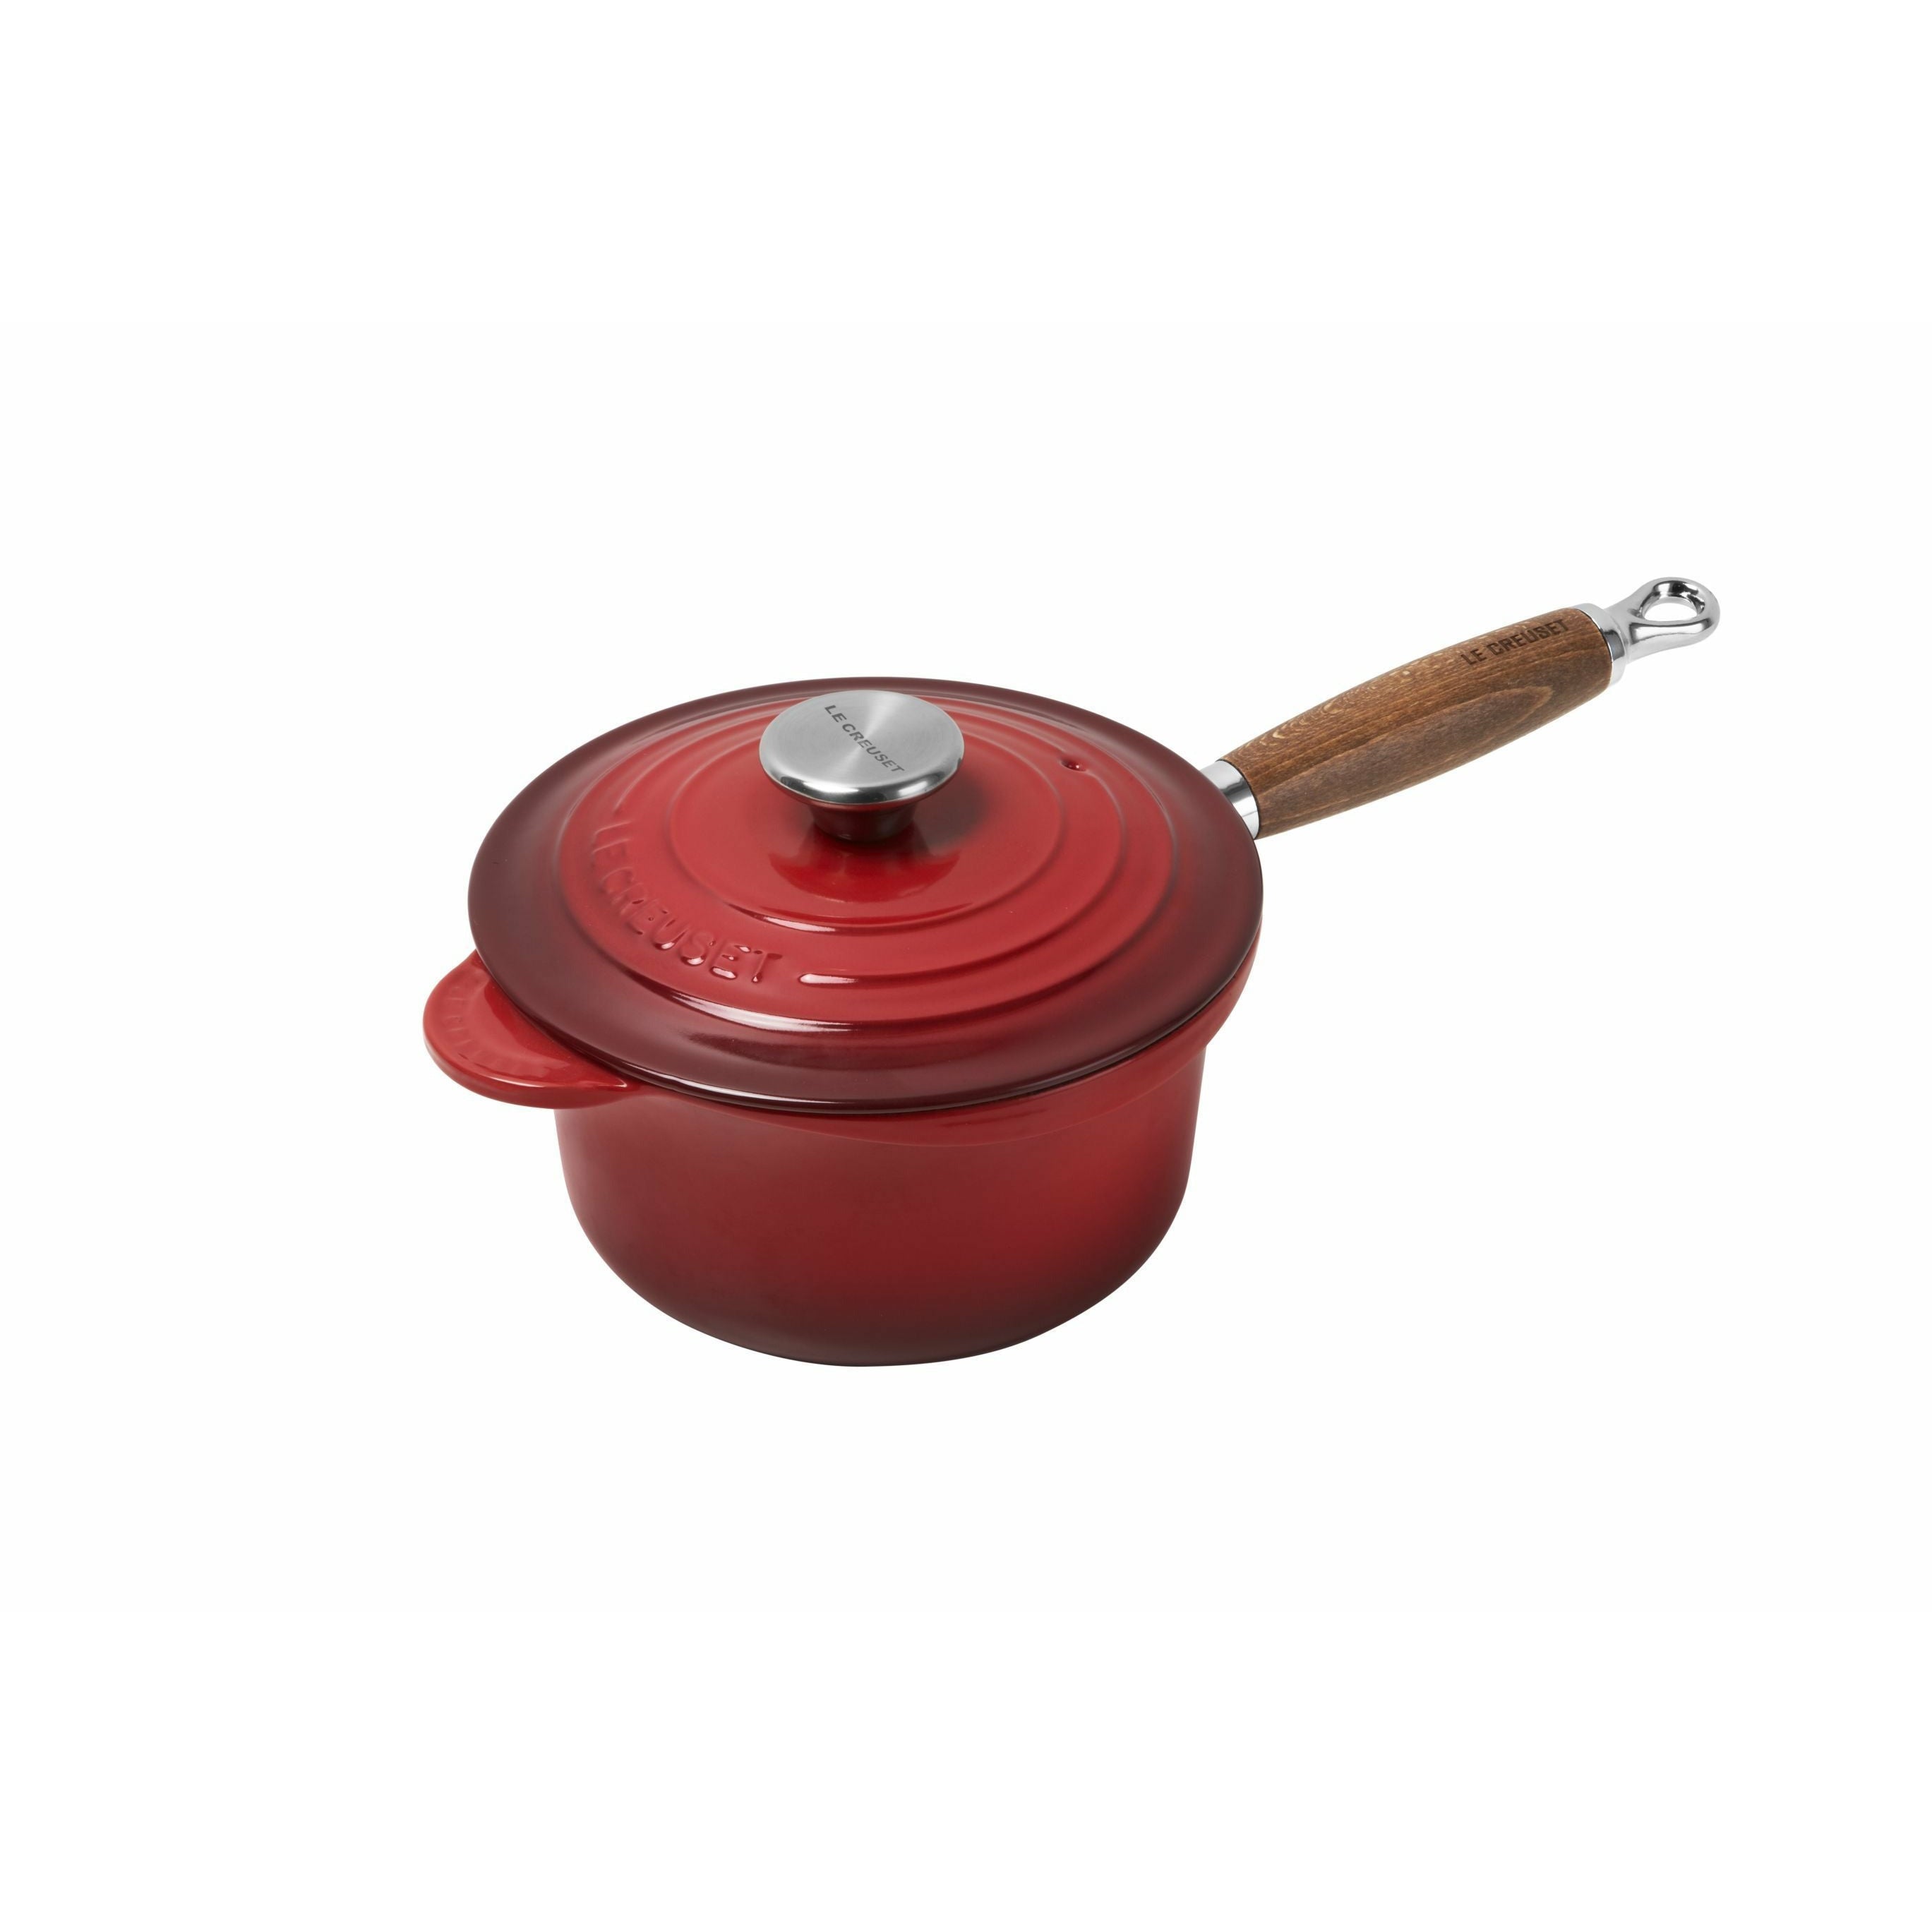 Le Creuset Tradition Professional Pot With Wooden Handle 18 Cm, Cherry Red